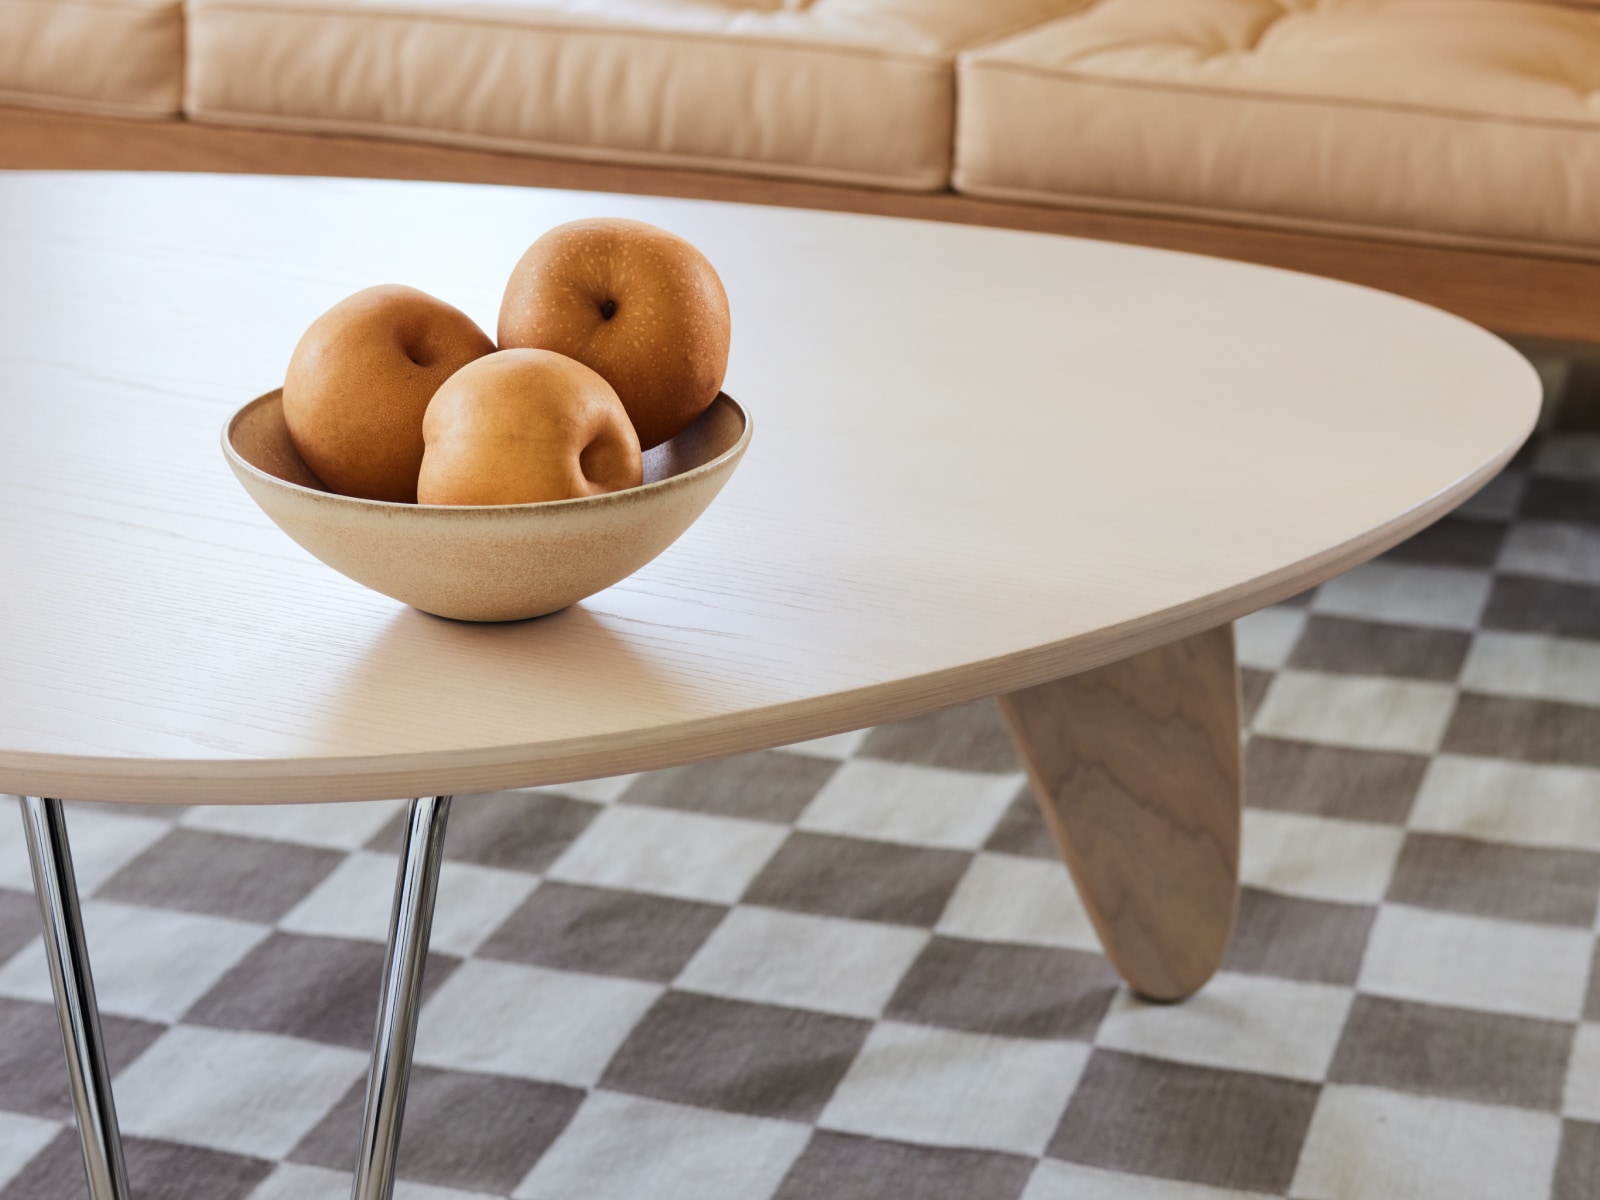 A close-up view of the Noguchi Rudder Table on a Girard Check Rug.